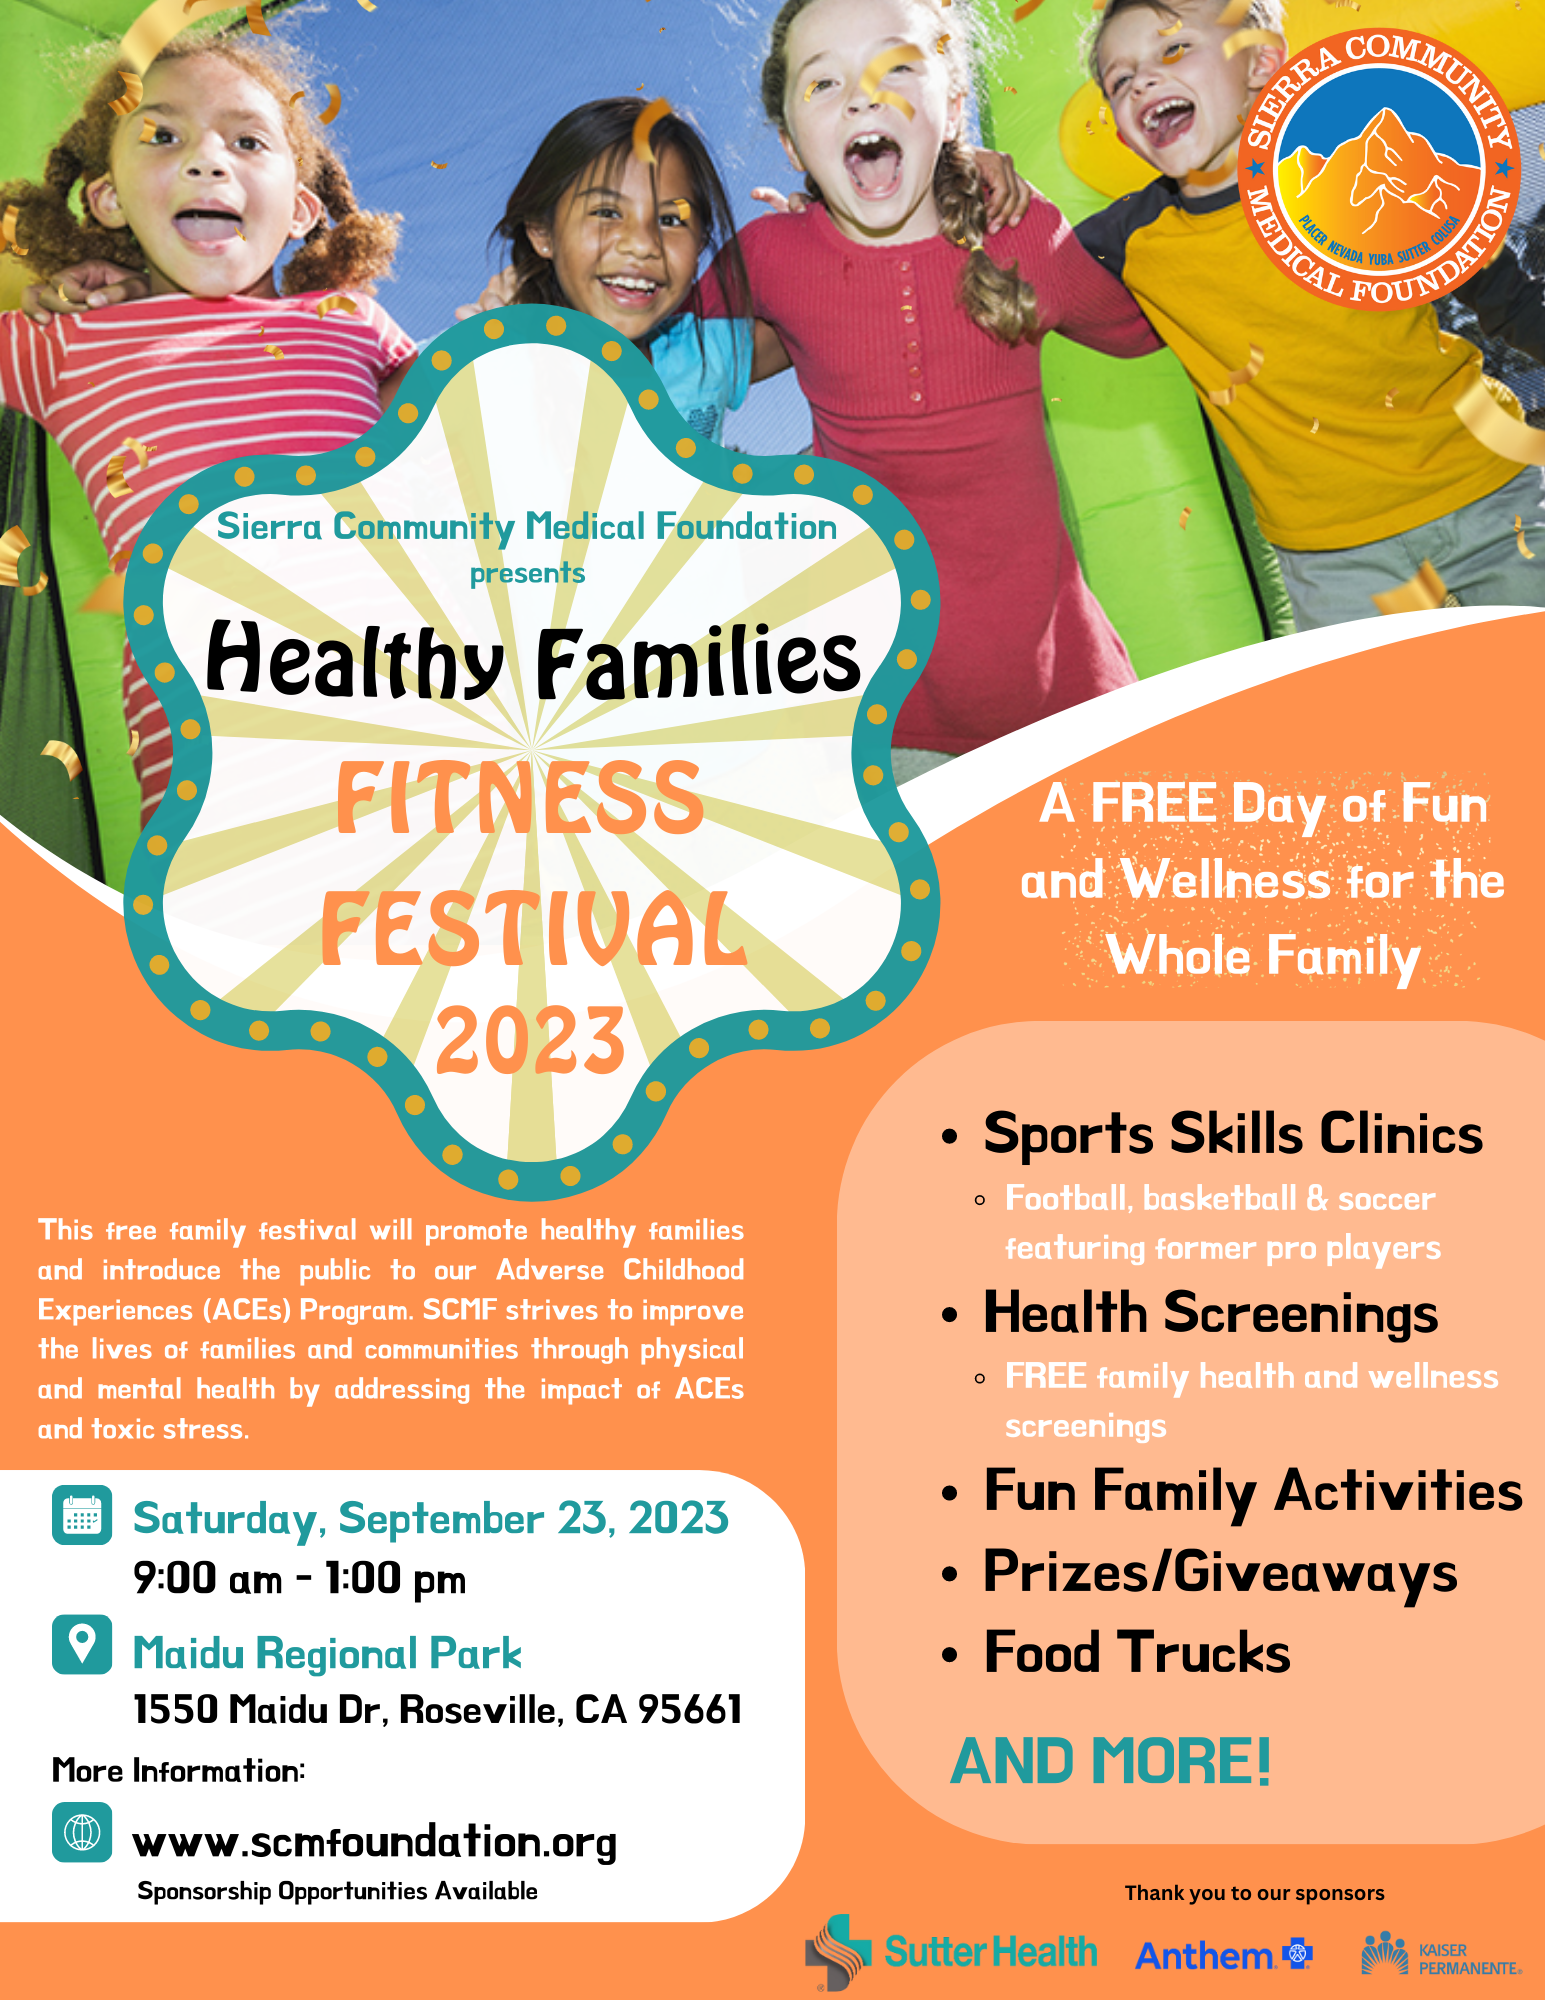 SCMF-Healthy Families Fitness Festival